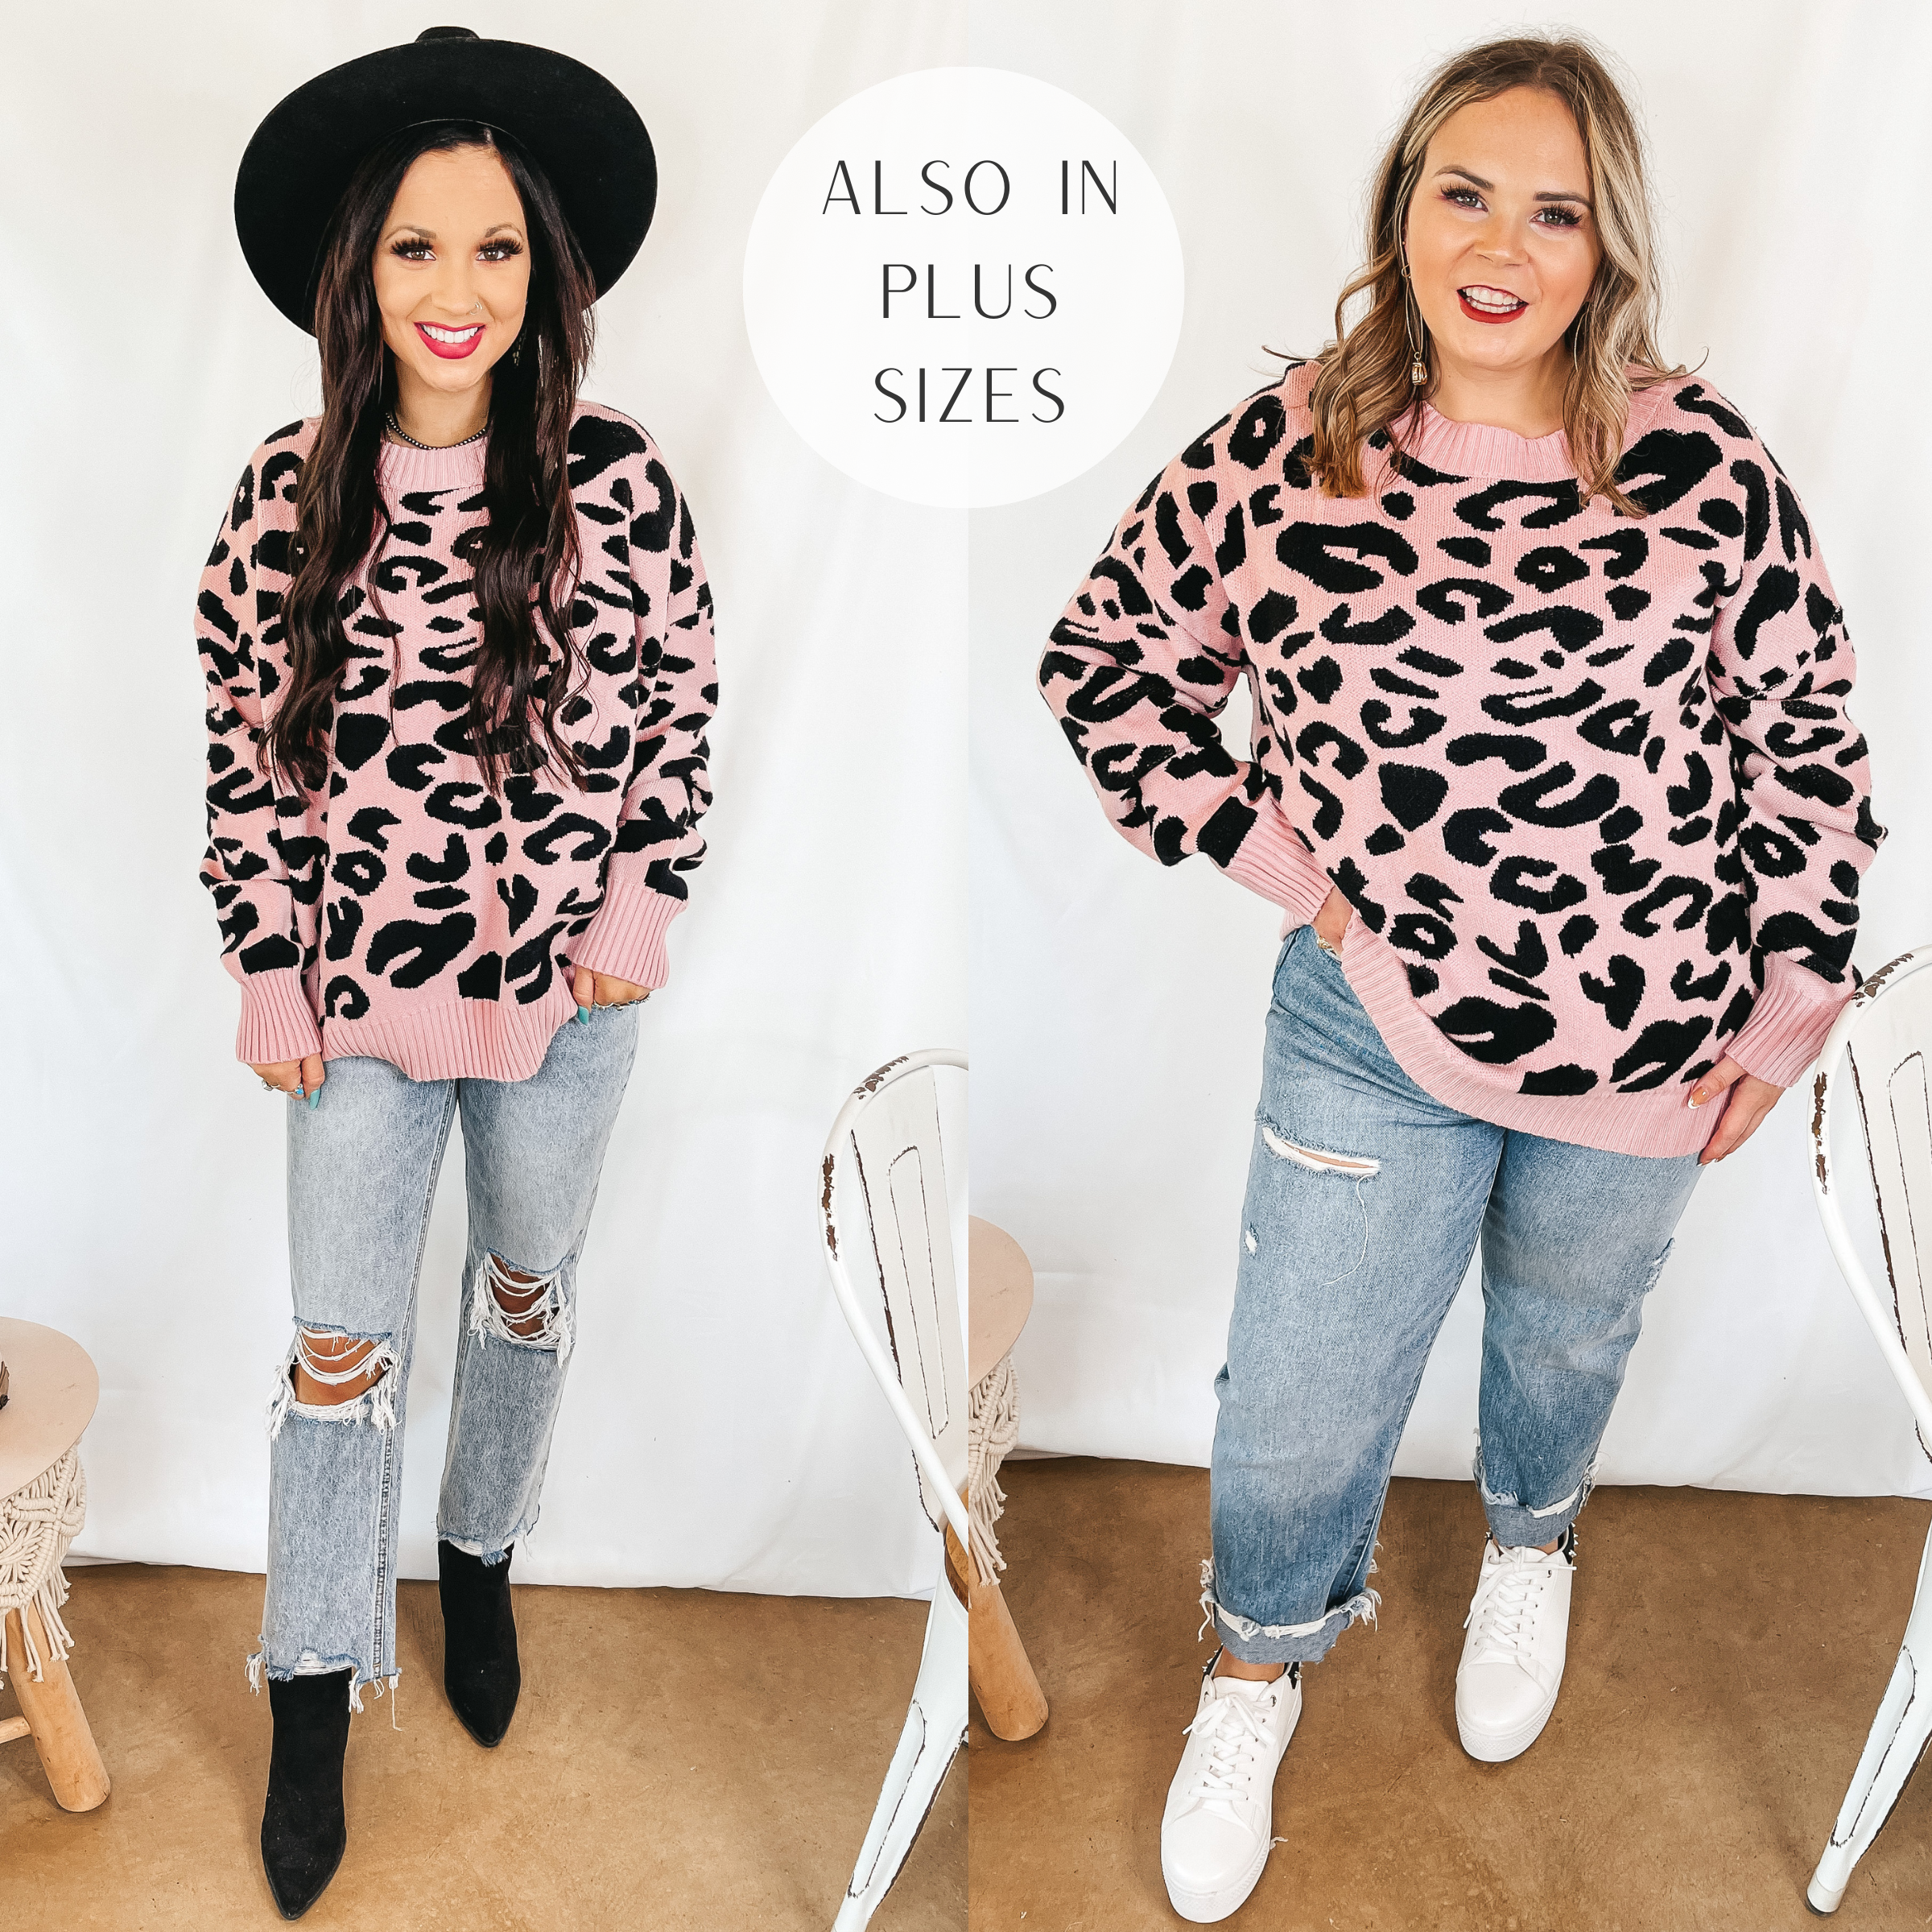 Models are wearing a light pink sweater with a black leopard print. Both models have this long sleeve top paired with light wash jeans. Size small model has it paired with a black hat and black booties. Size large model has it paired with white sneakers and silver earrings.